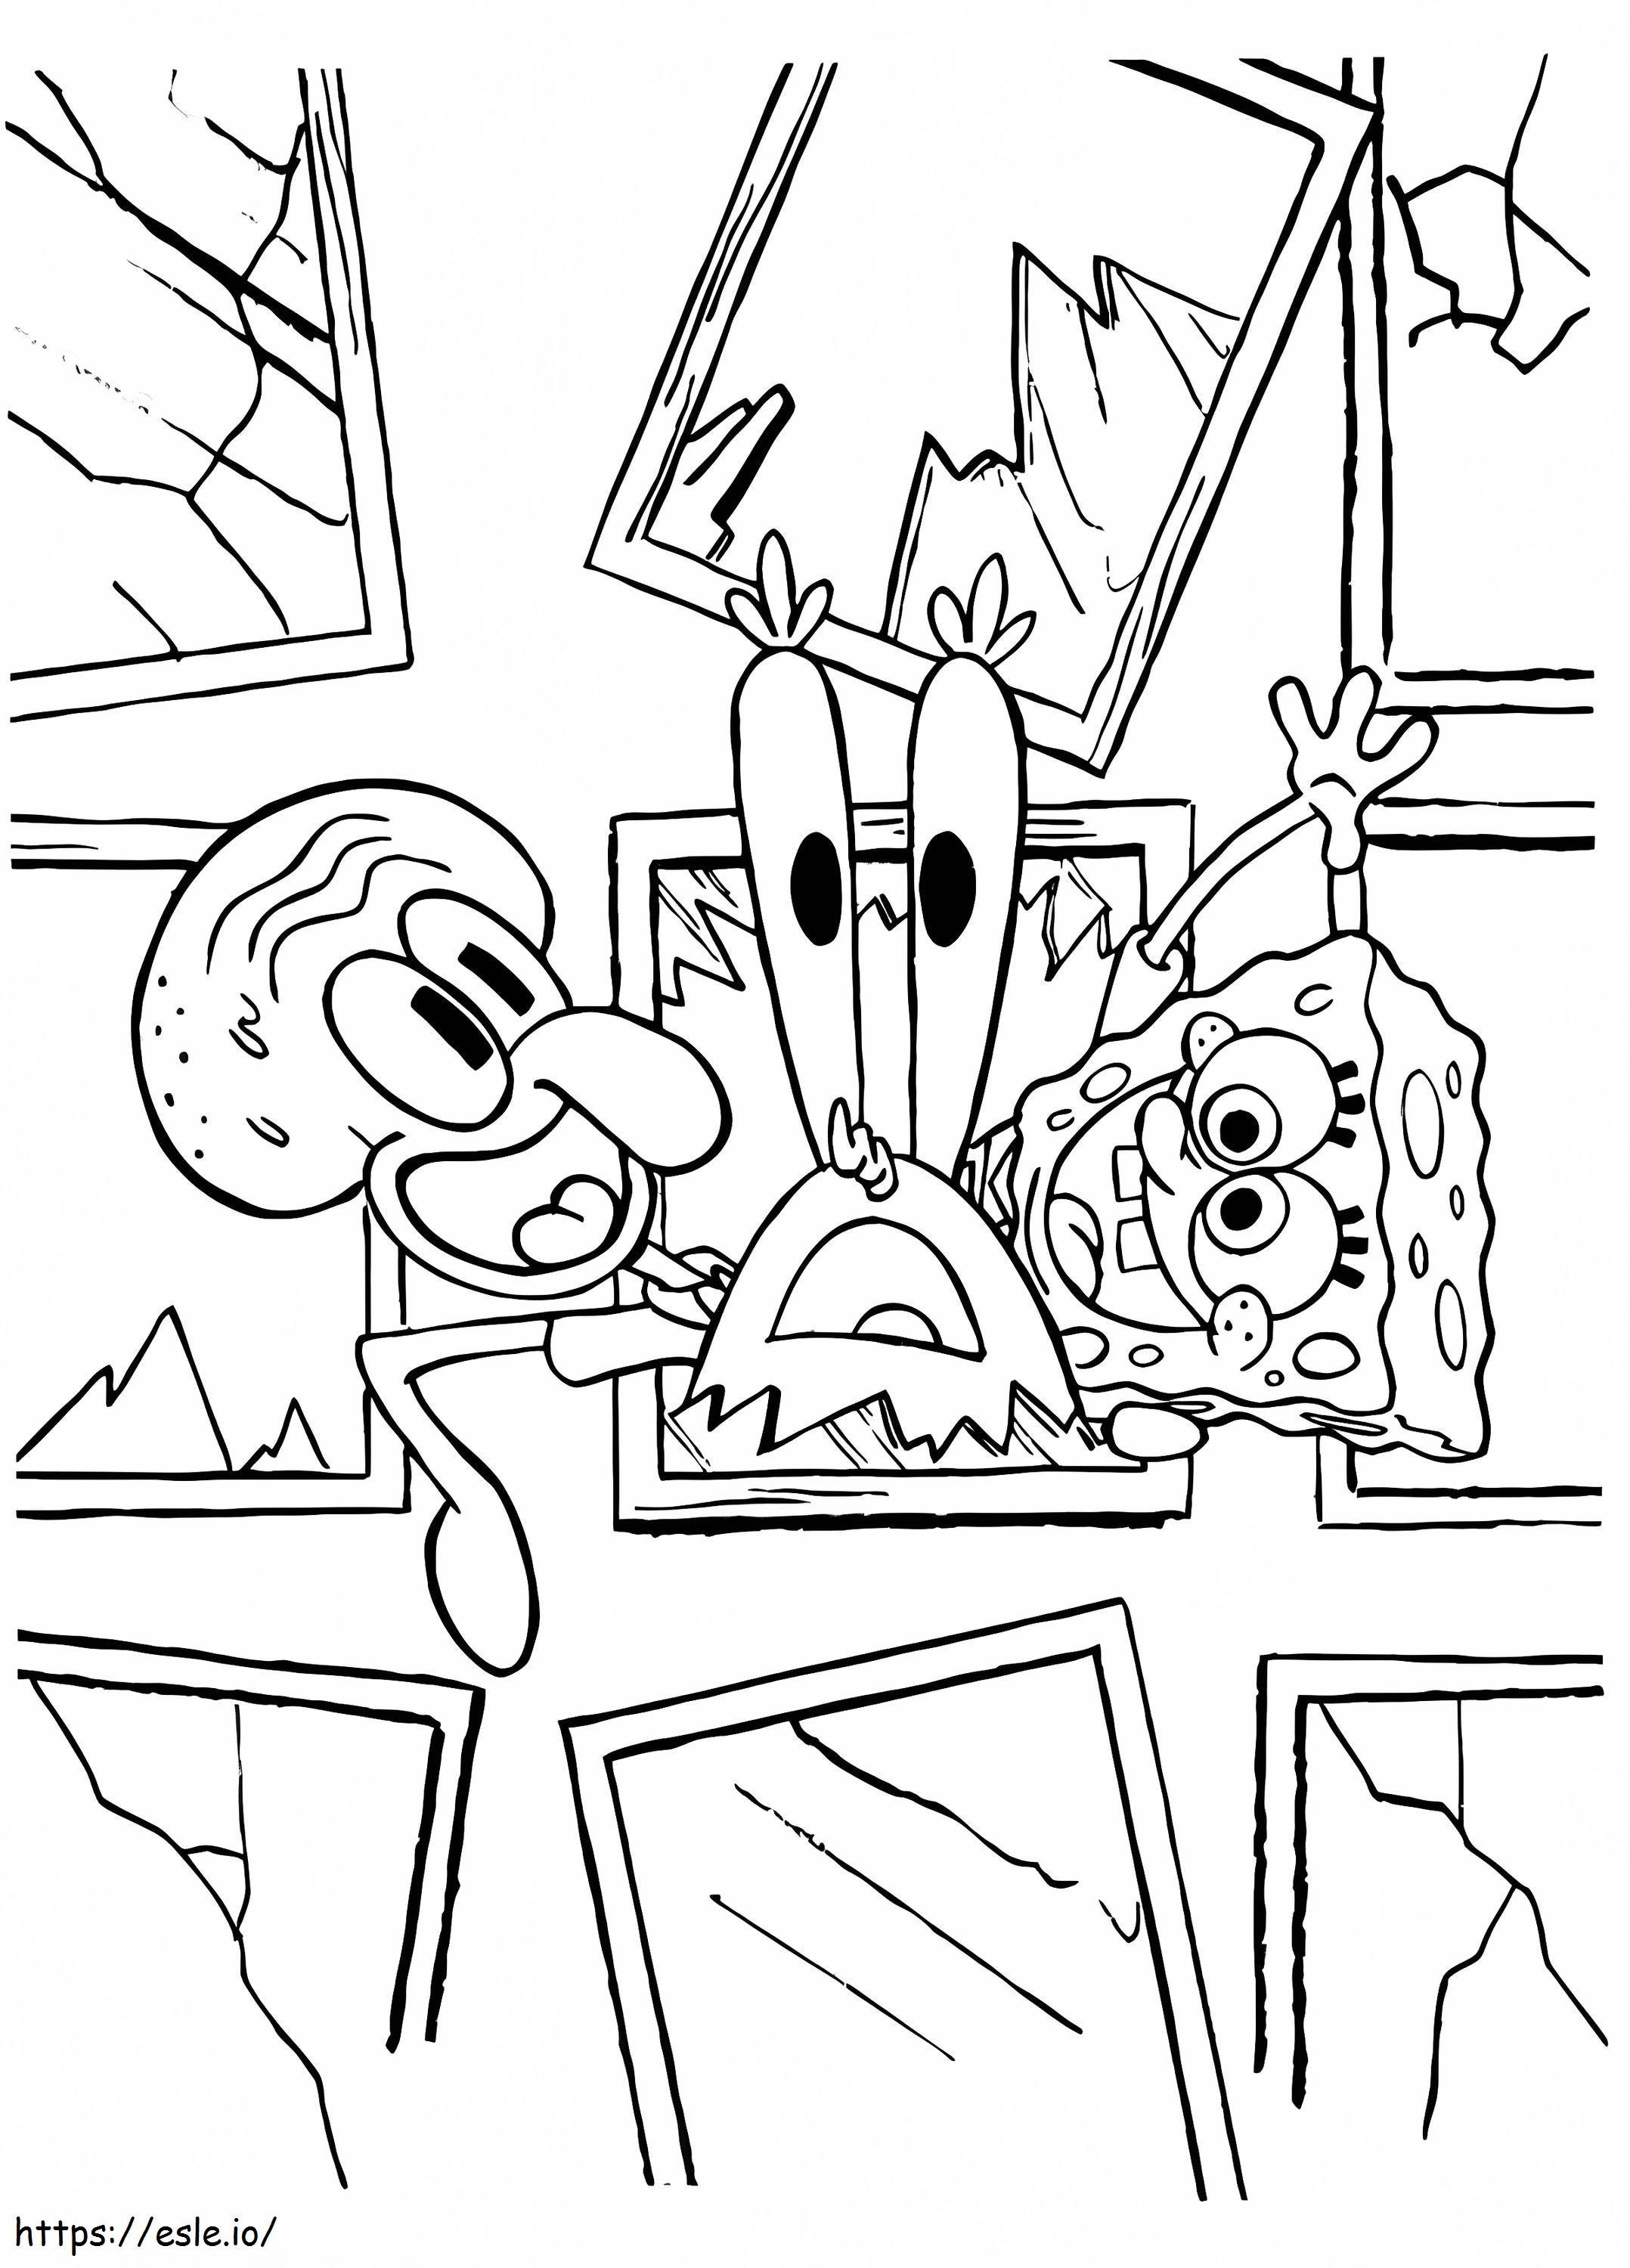 SpongeBob And Squid Ward Mr. Krabs Breaking The Window Glass coloring page